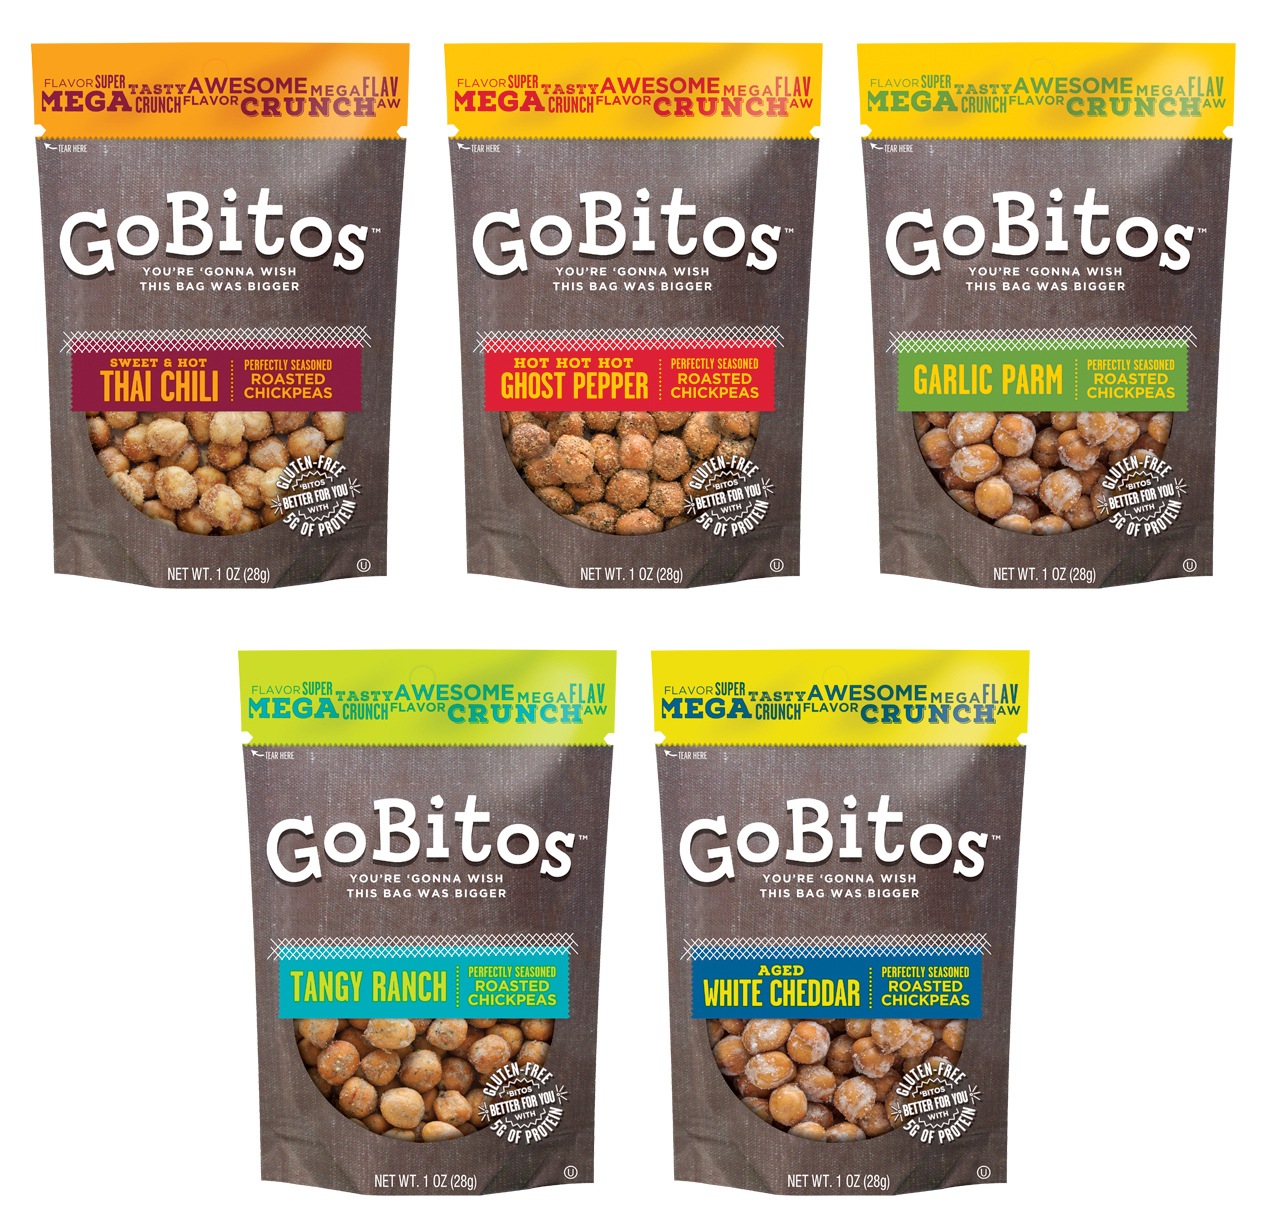 Gobitos chickpea snack branding and packaging